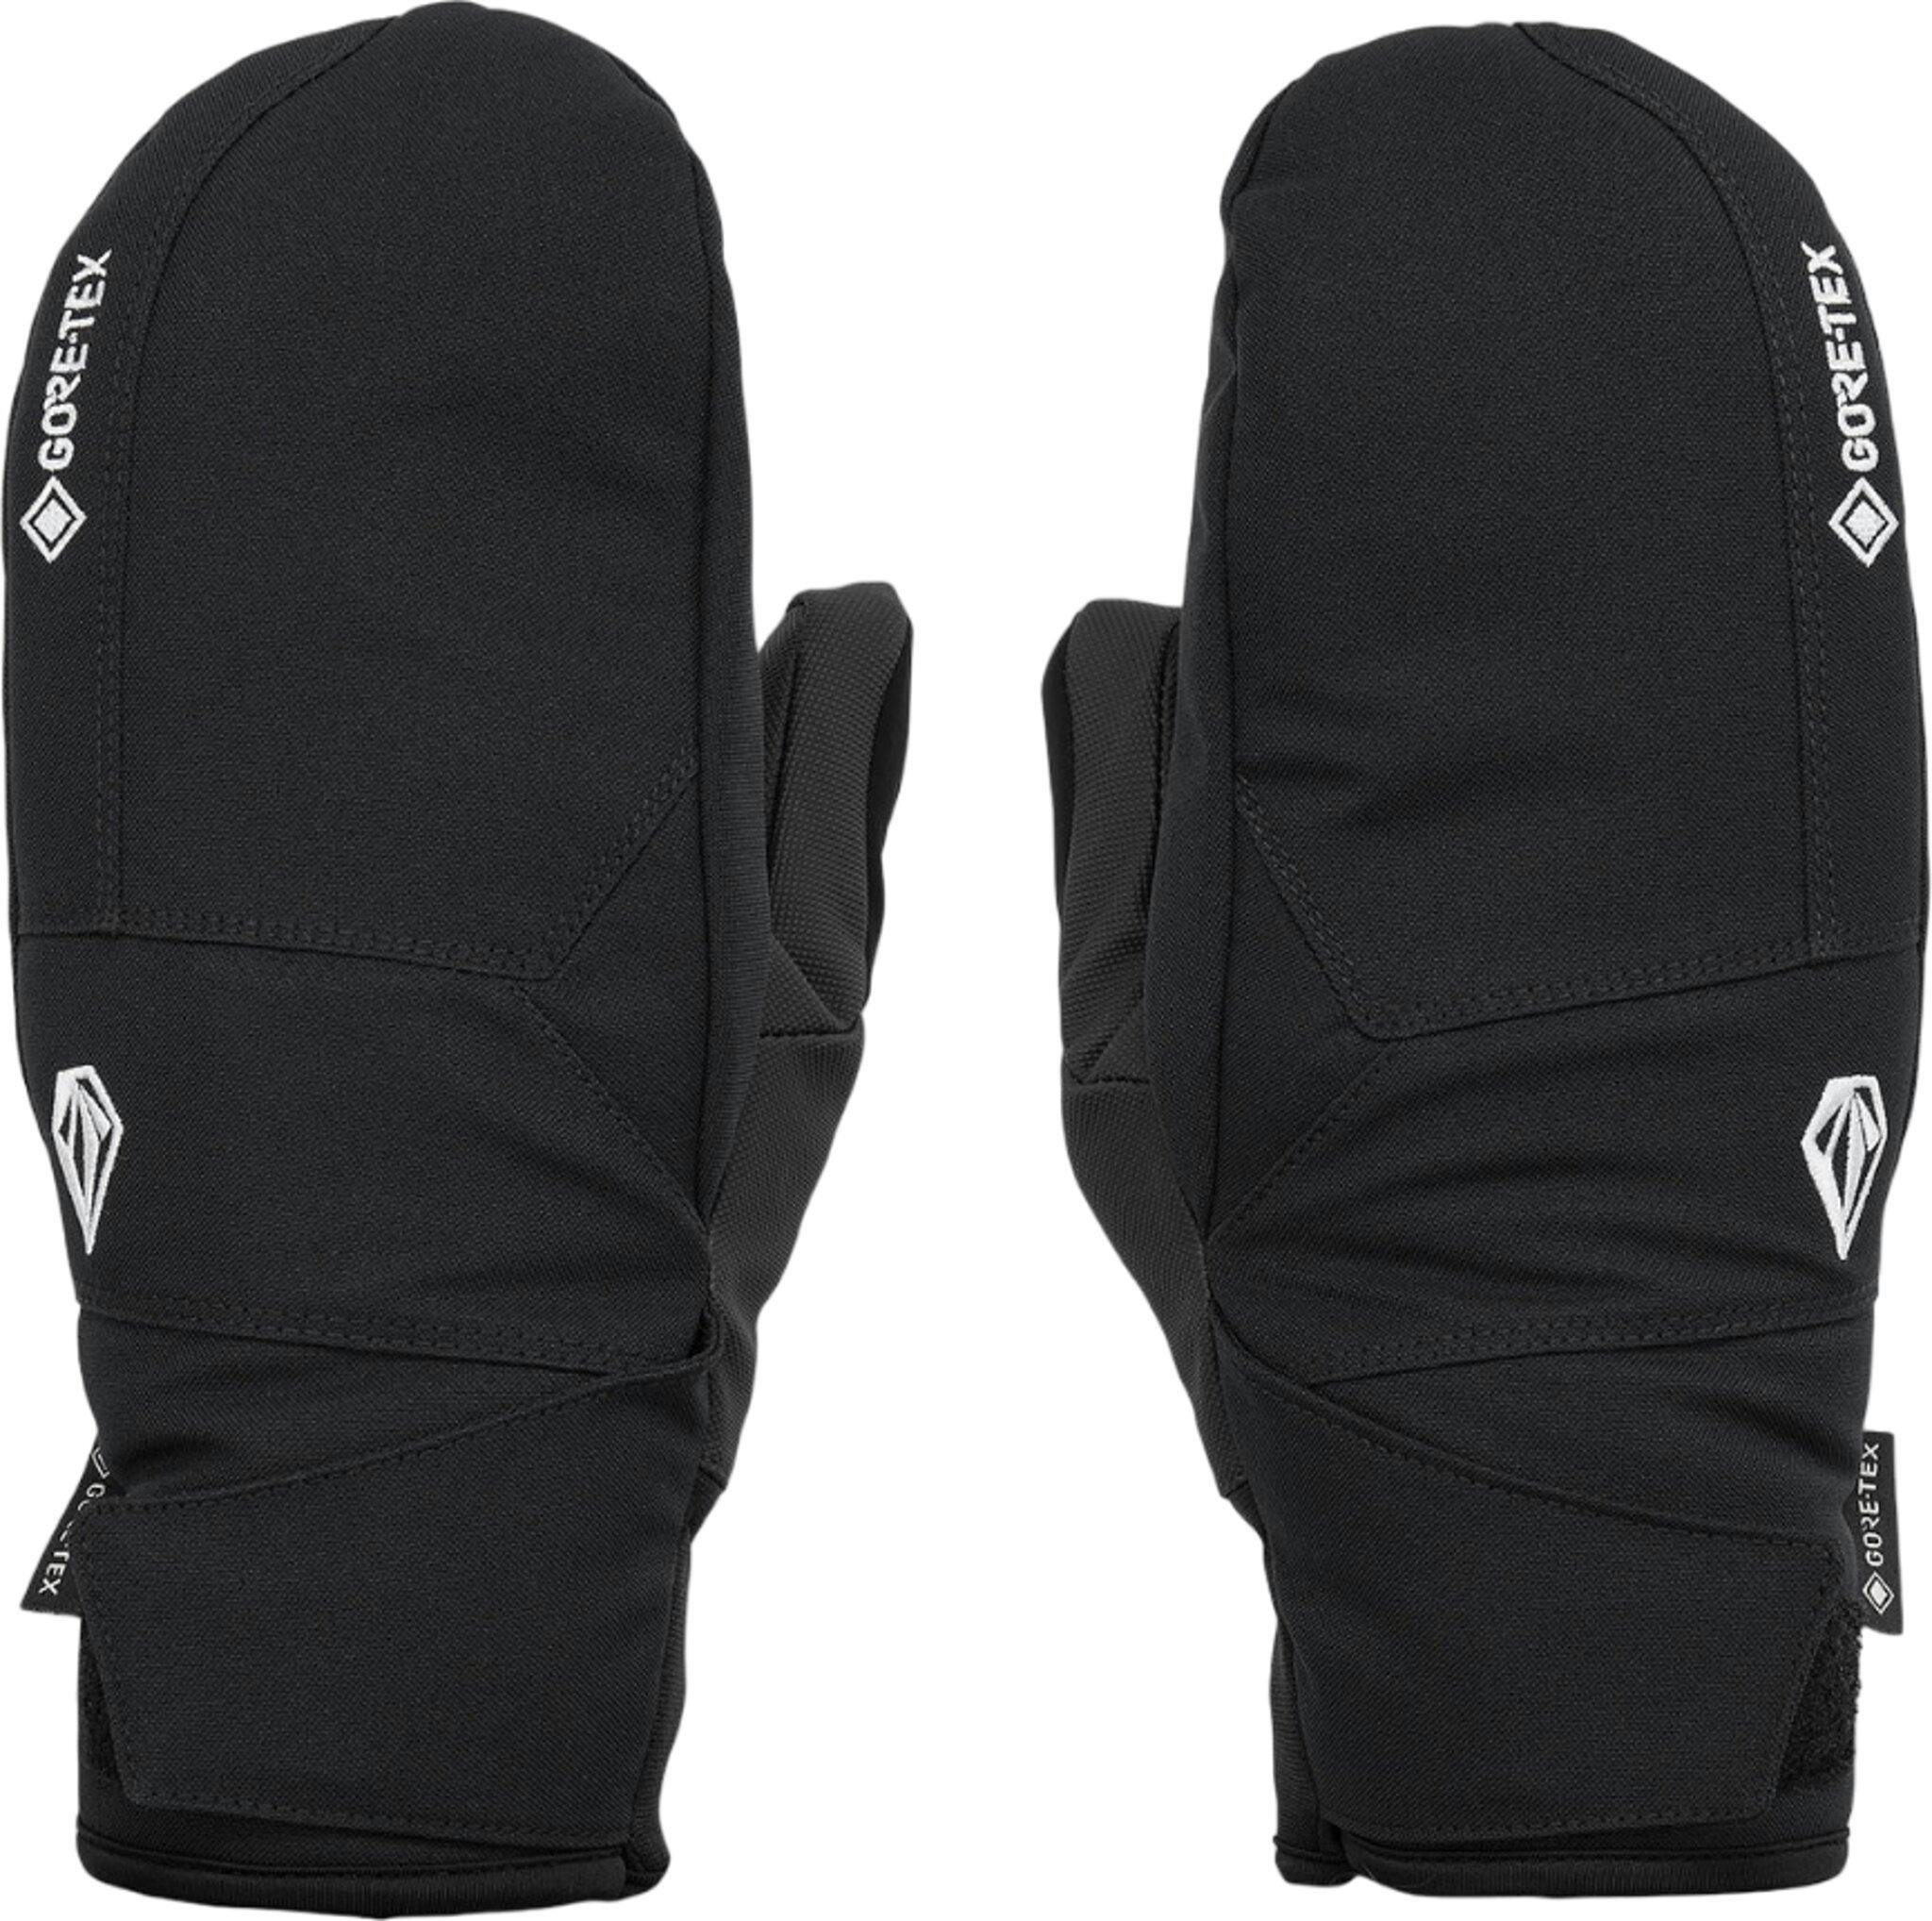 Product image for Stay Dry Gore-Tex Mittens - Men's